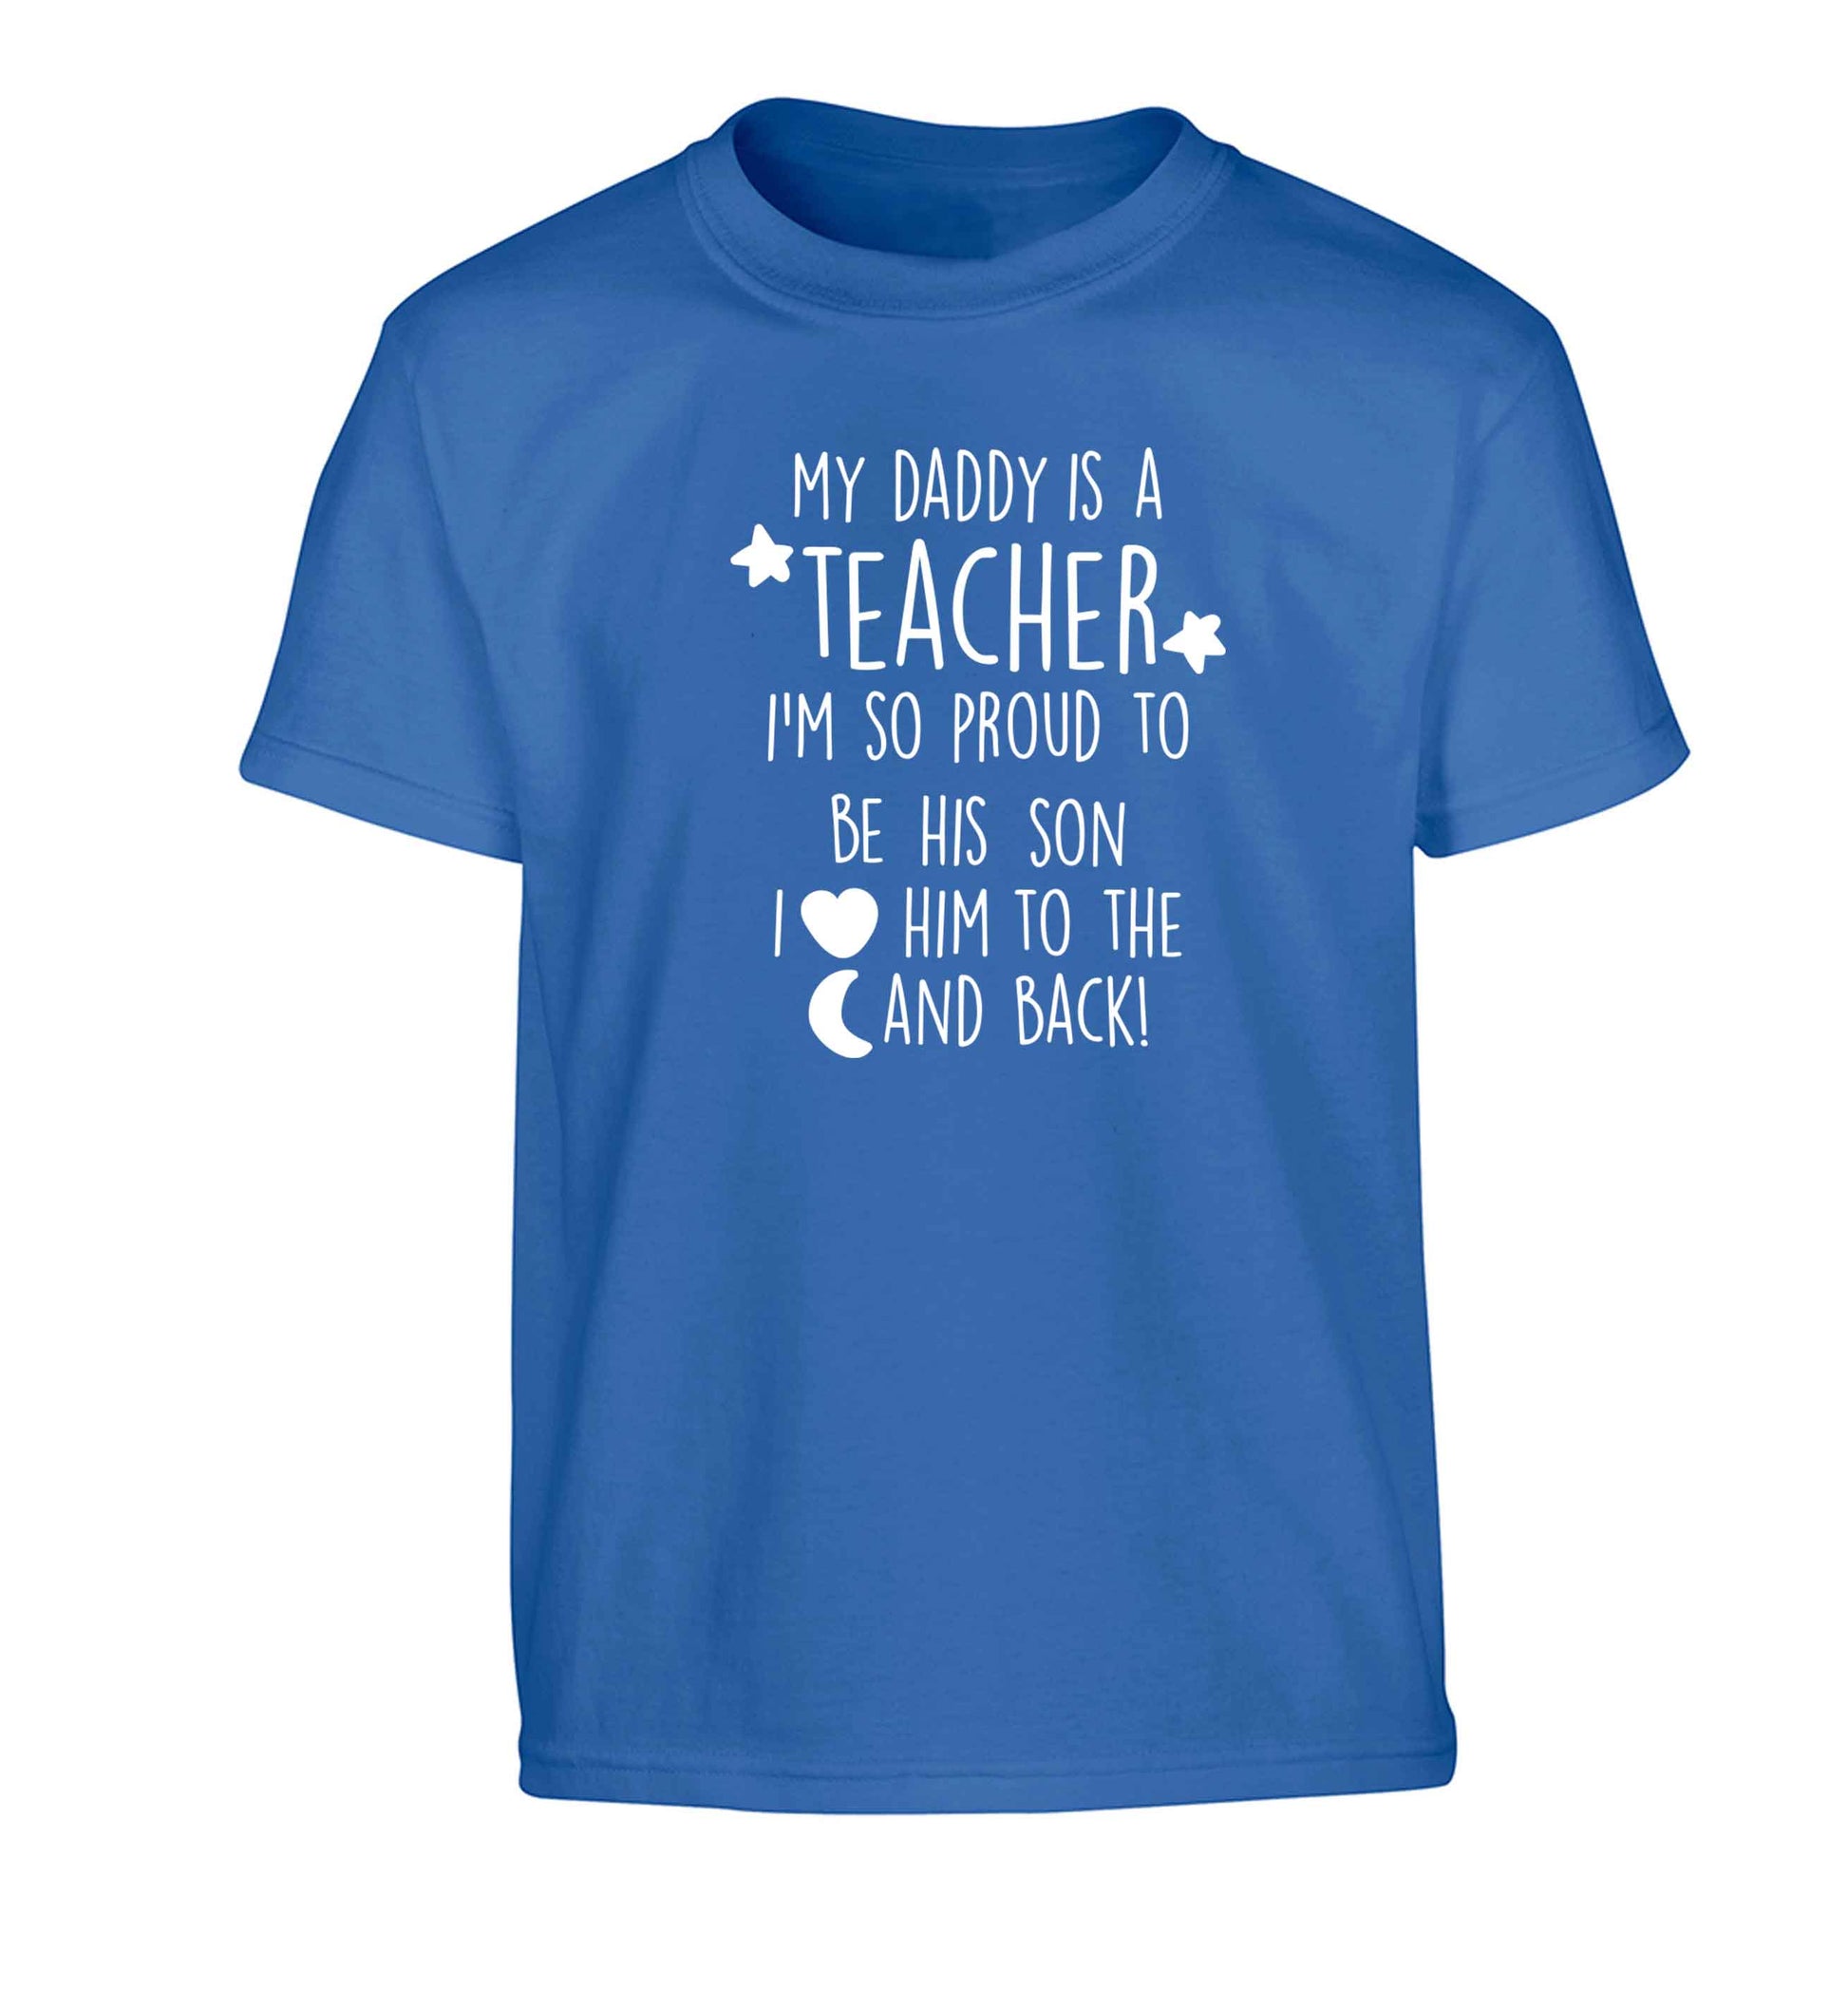 My daddy is a teacher I'm so proud to be his son I love her to the moon and back Children's blue Tshirt 12-13 Years